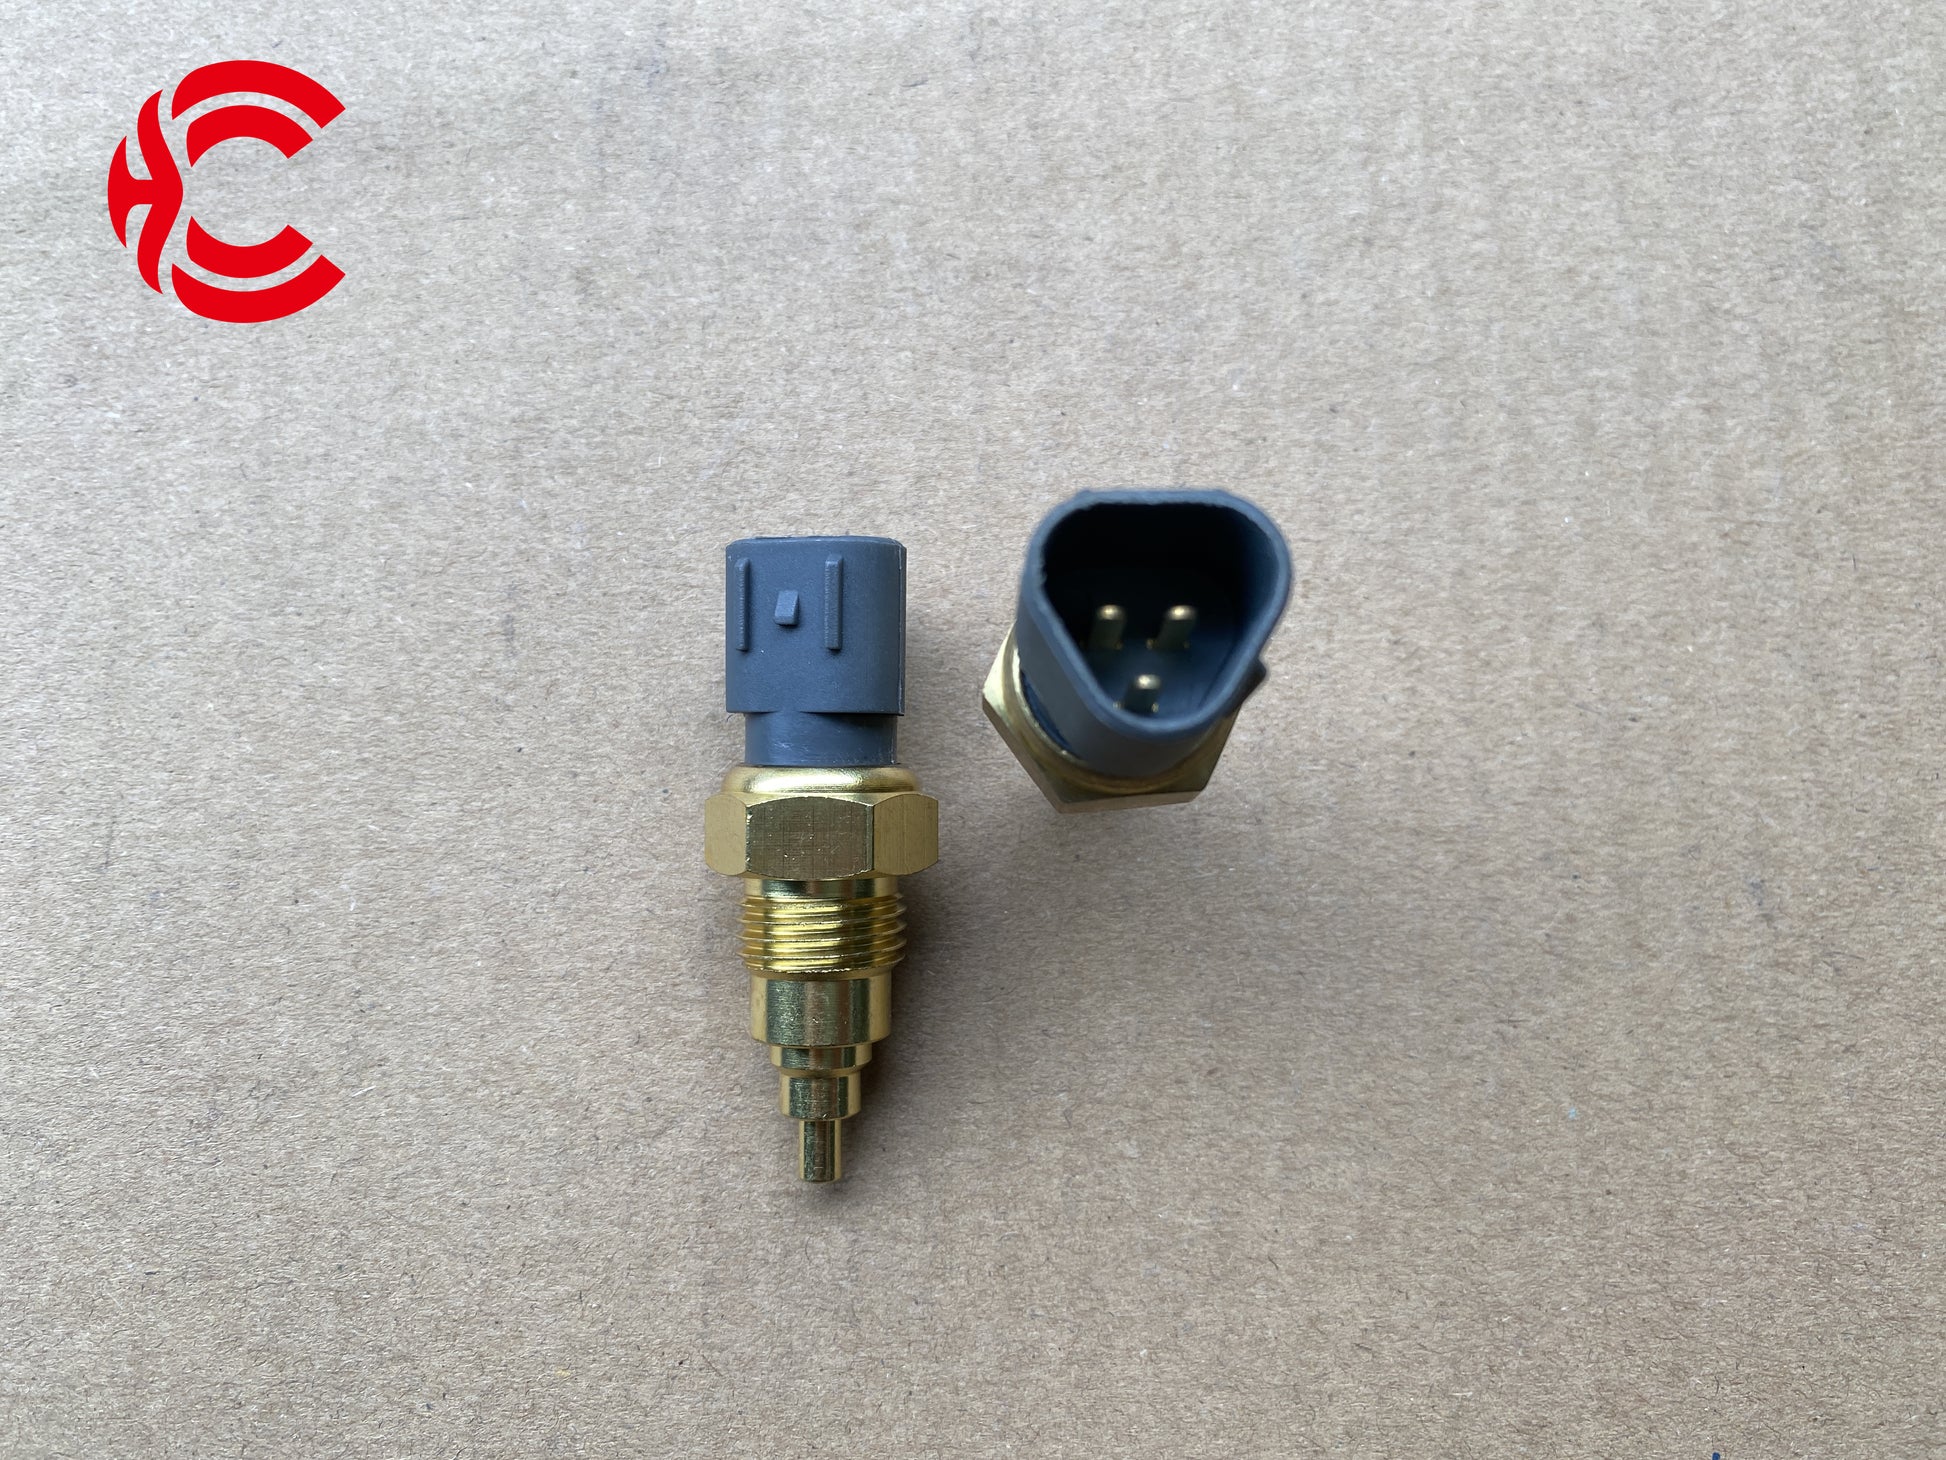 OEM: 071560-0110 R61540090004 3602160-621-0000Material: MetalColor: black GoldenOrigin: Made in ChinaWeight: 100gPacking List: 1* Coolant Temperature Sensor More ServiceWe can provide OEM Manufacturing serviceWe can Be your one-step solution for Auto PartsWe can provide technical scheme for you Feel Free to Contact Us, We will get back to you as soon as possible.